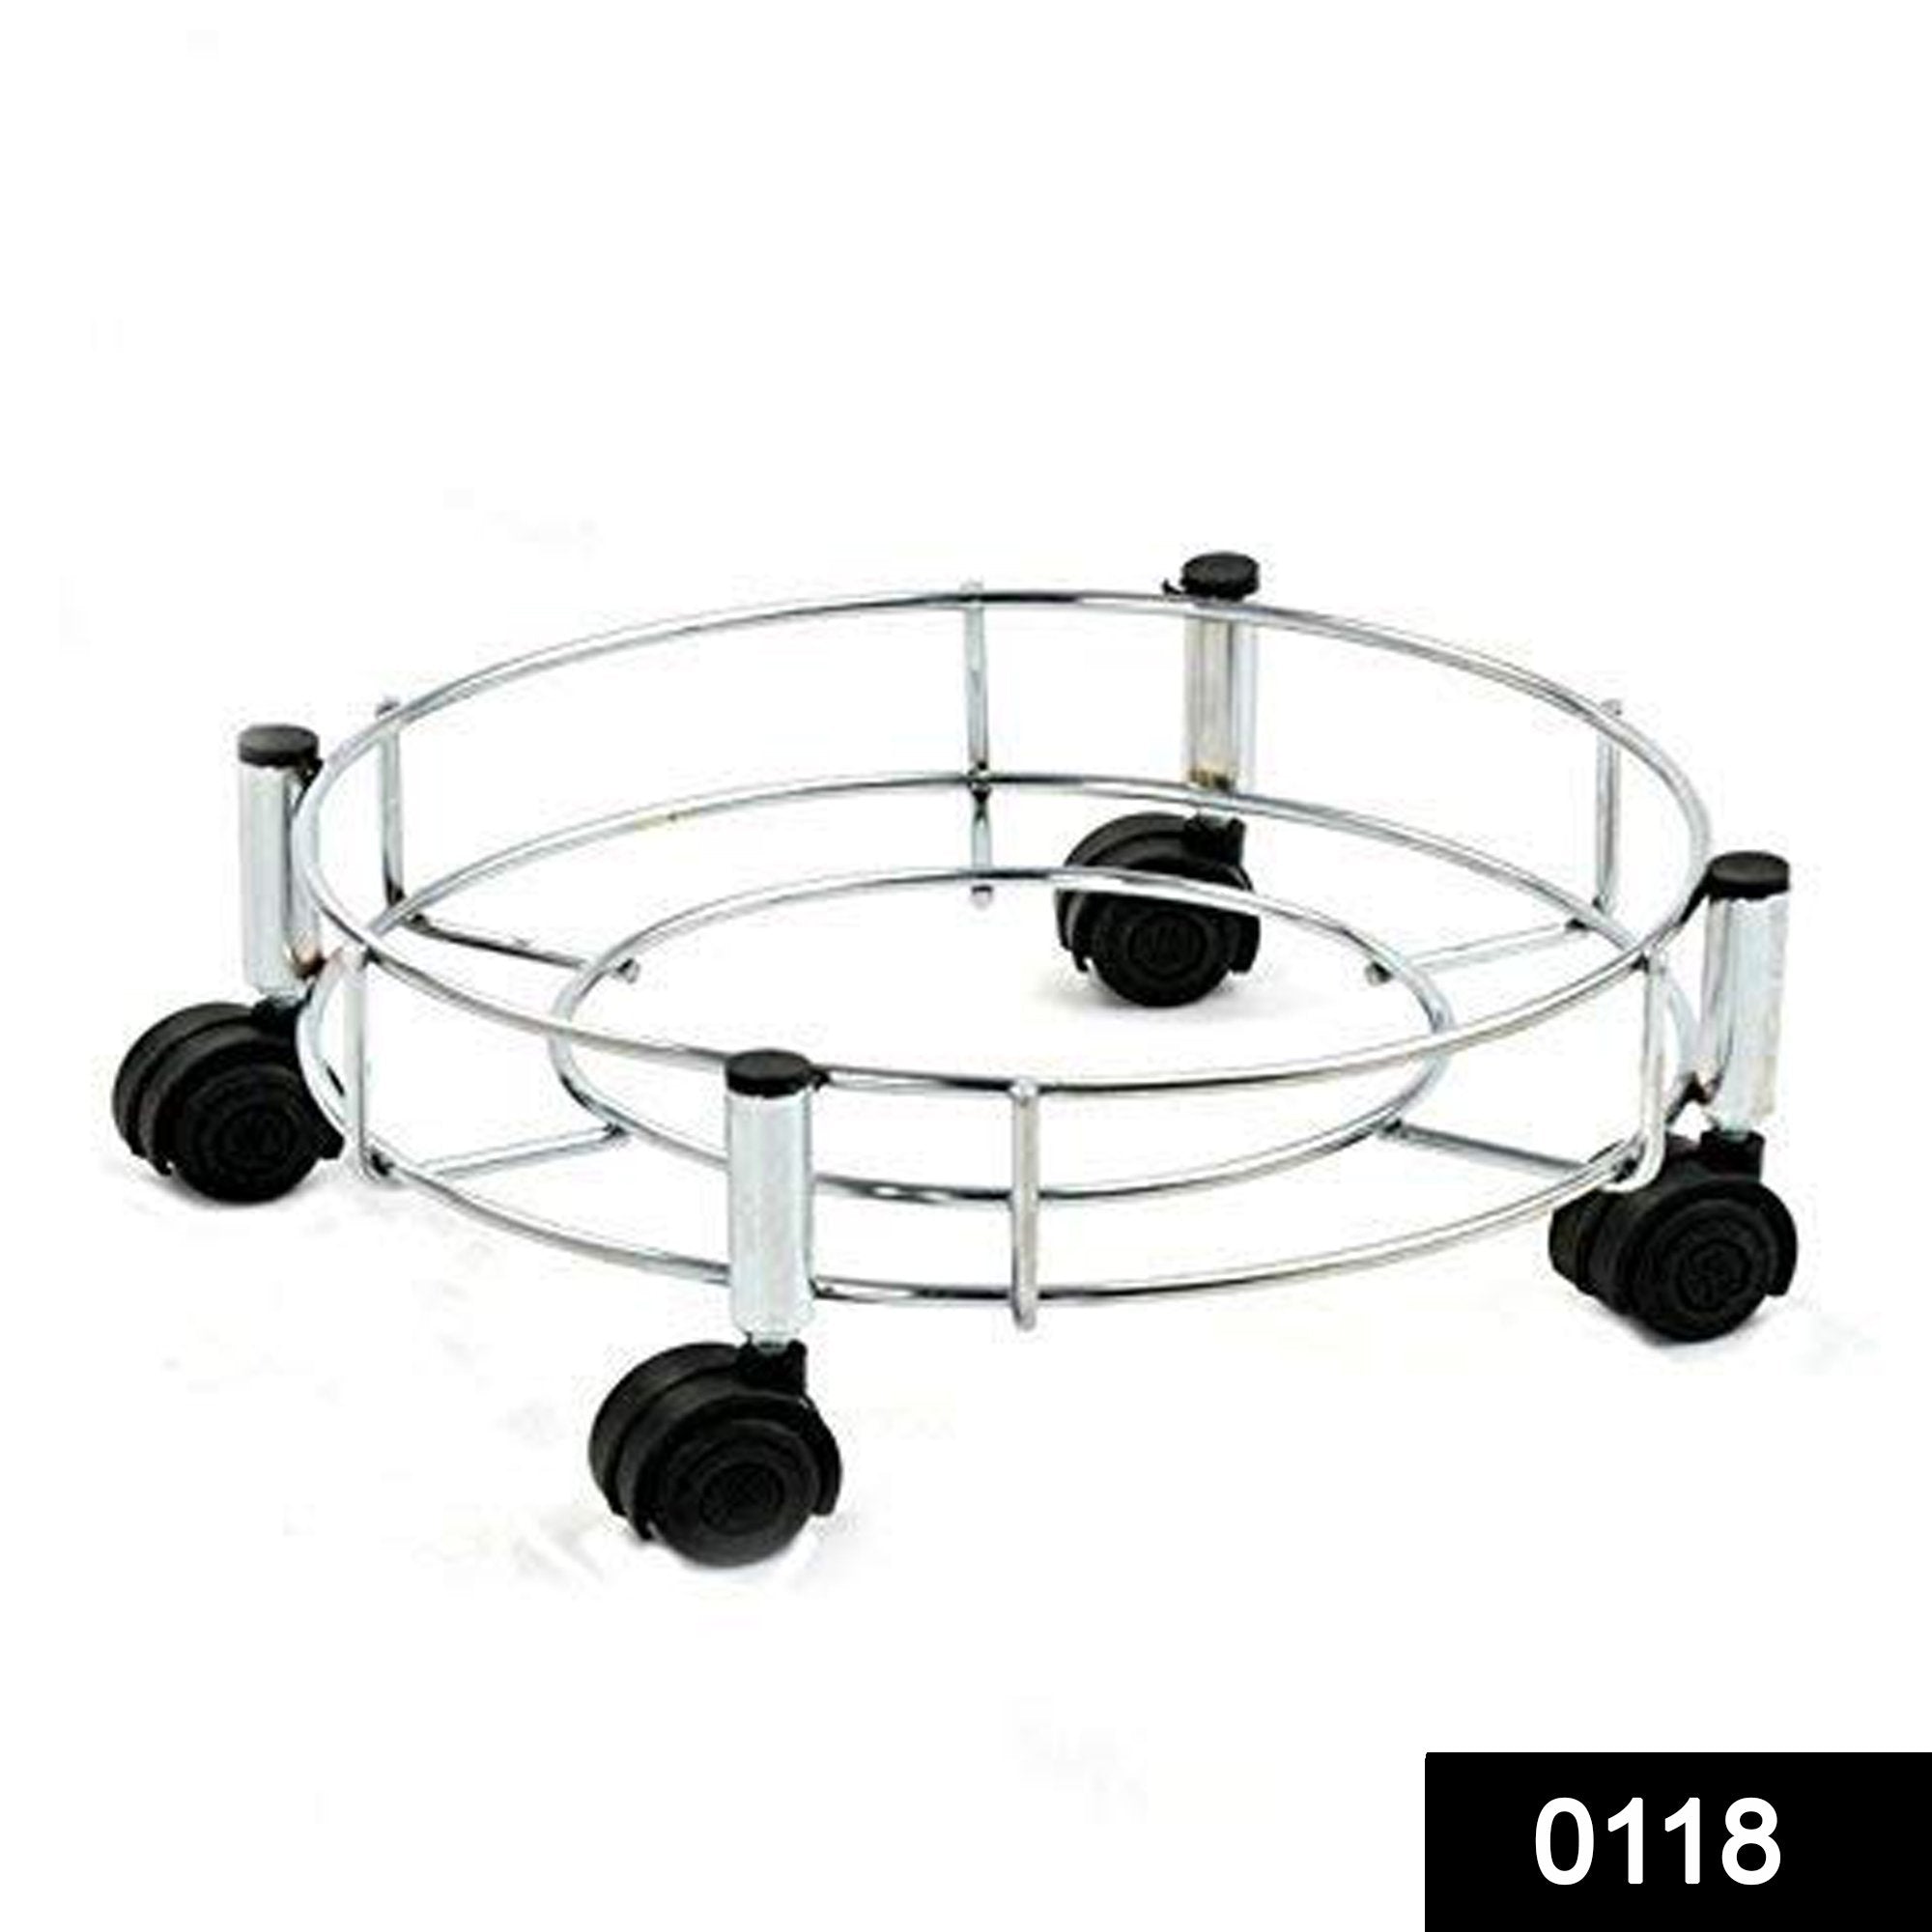 ambitionofcreativity in stainless steel gas cylinder trolley with wheels gas trolly lpg cylinder stand gas trolly wheel gas trolley stainless steel cylinder trolley with wheels cylinder wheel stand